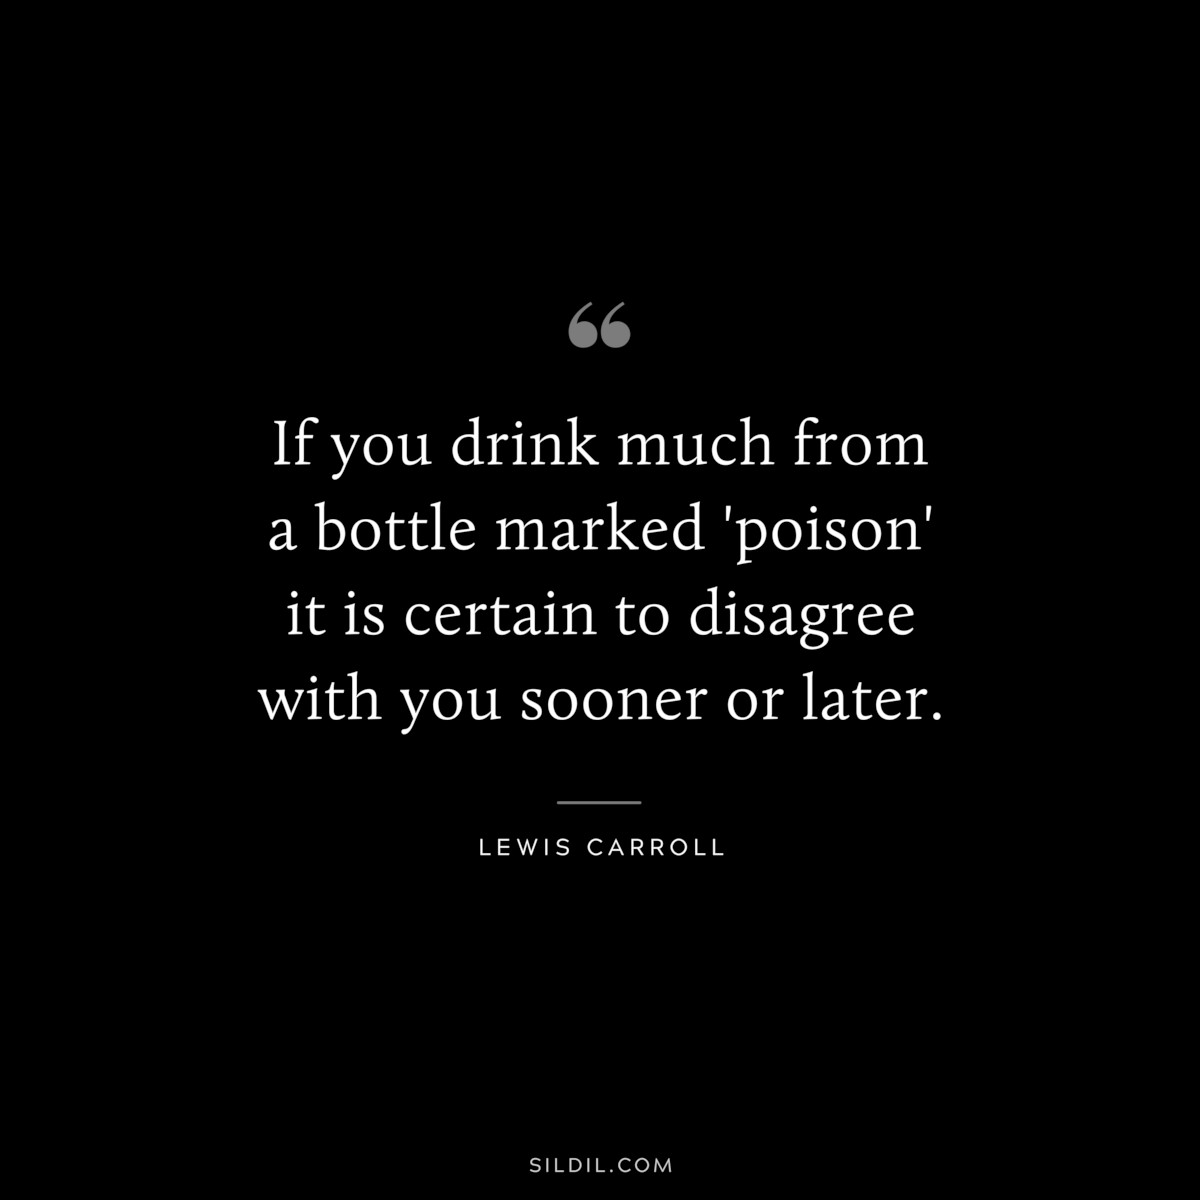 If you drink much from a bottle marked 'poison' it is certain to disagree with you sooner or later.